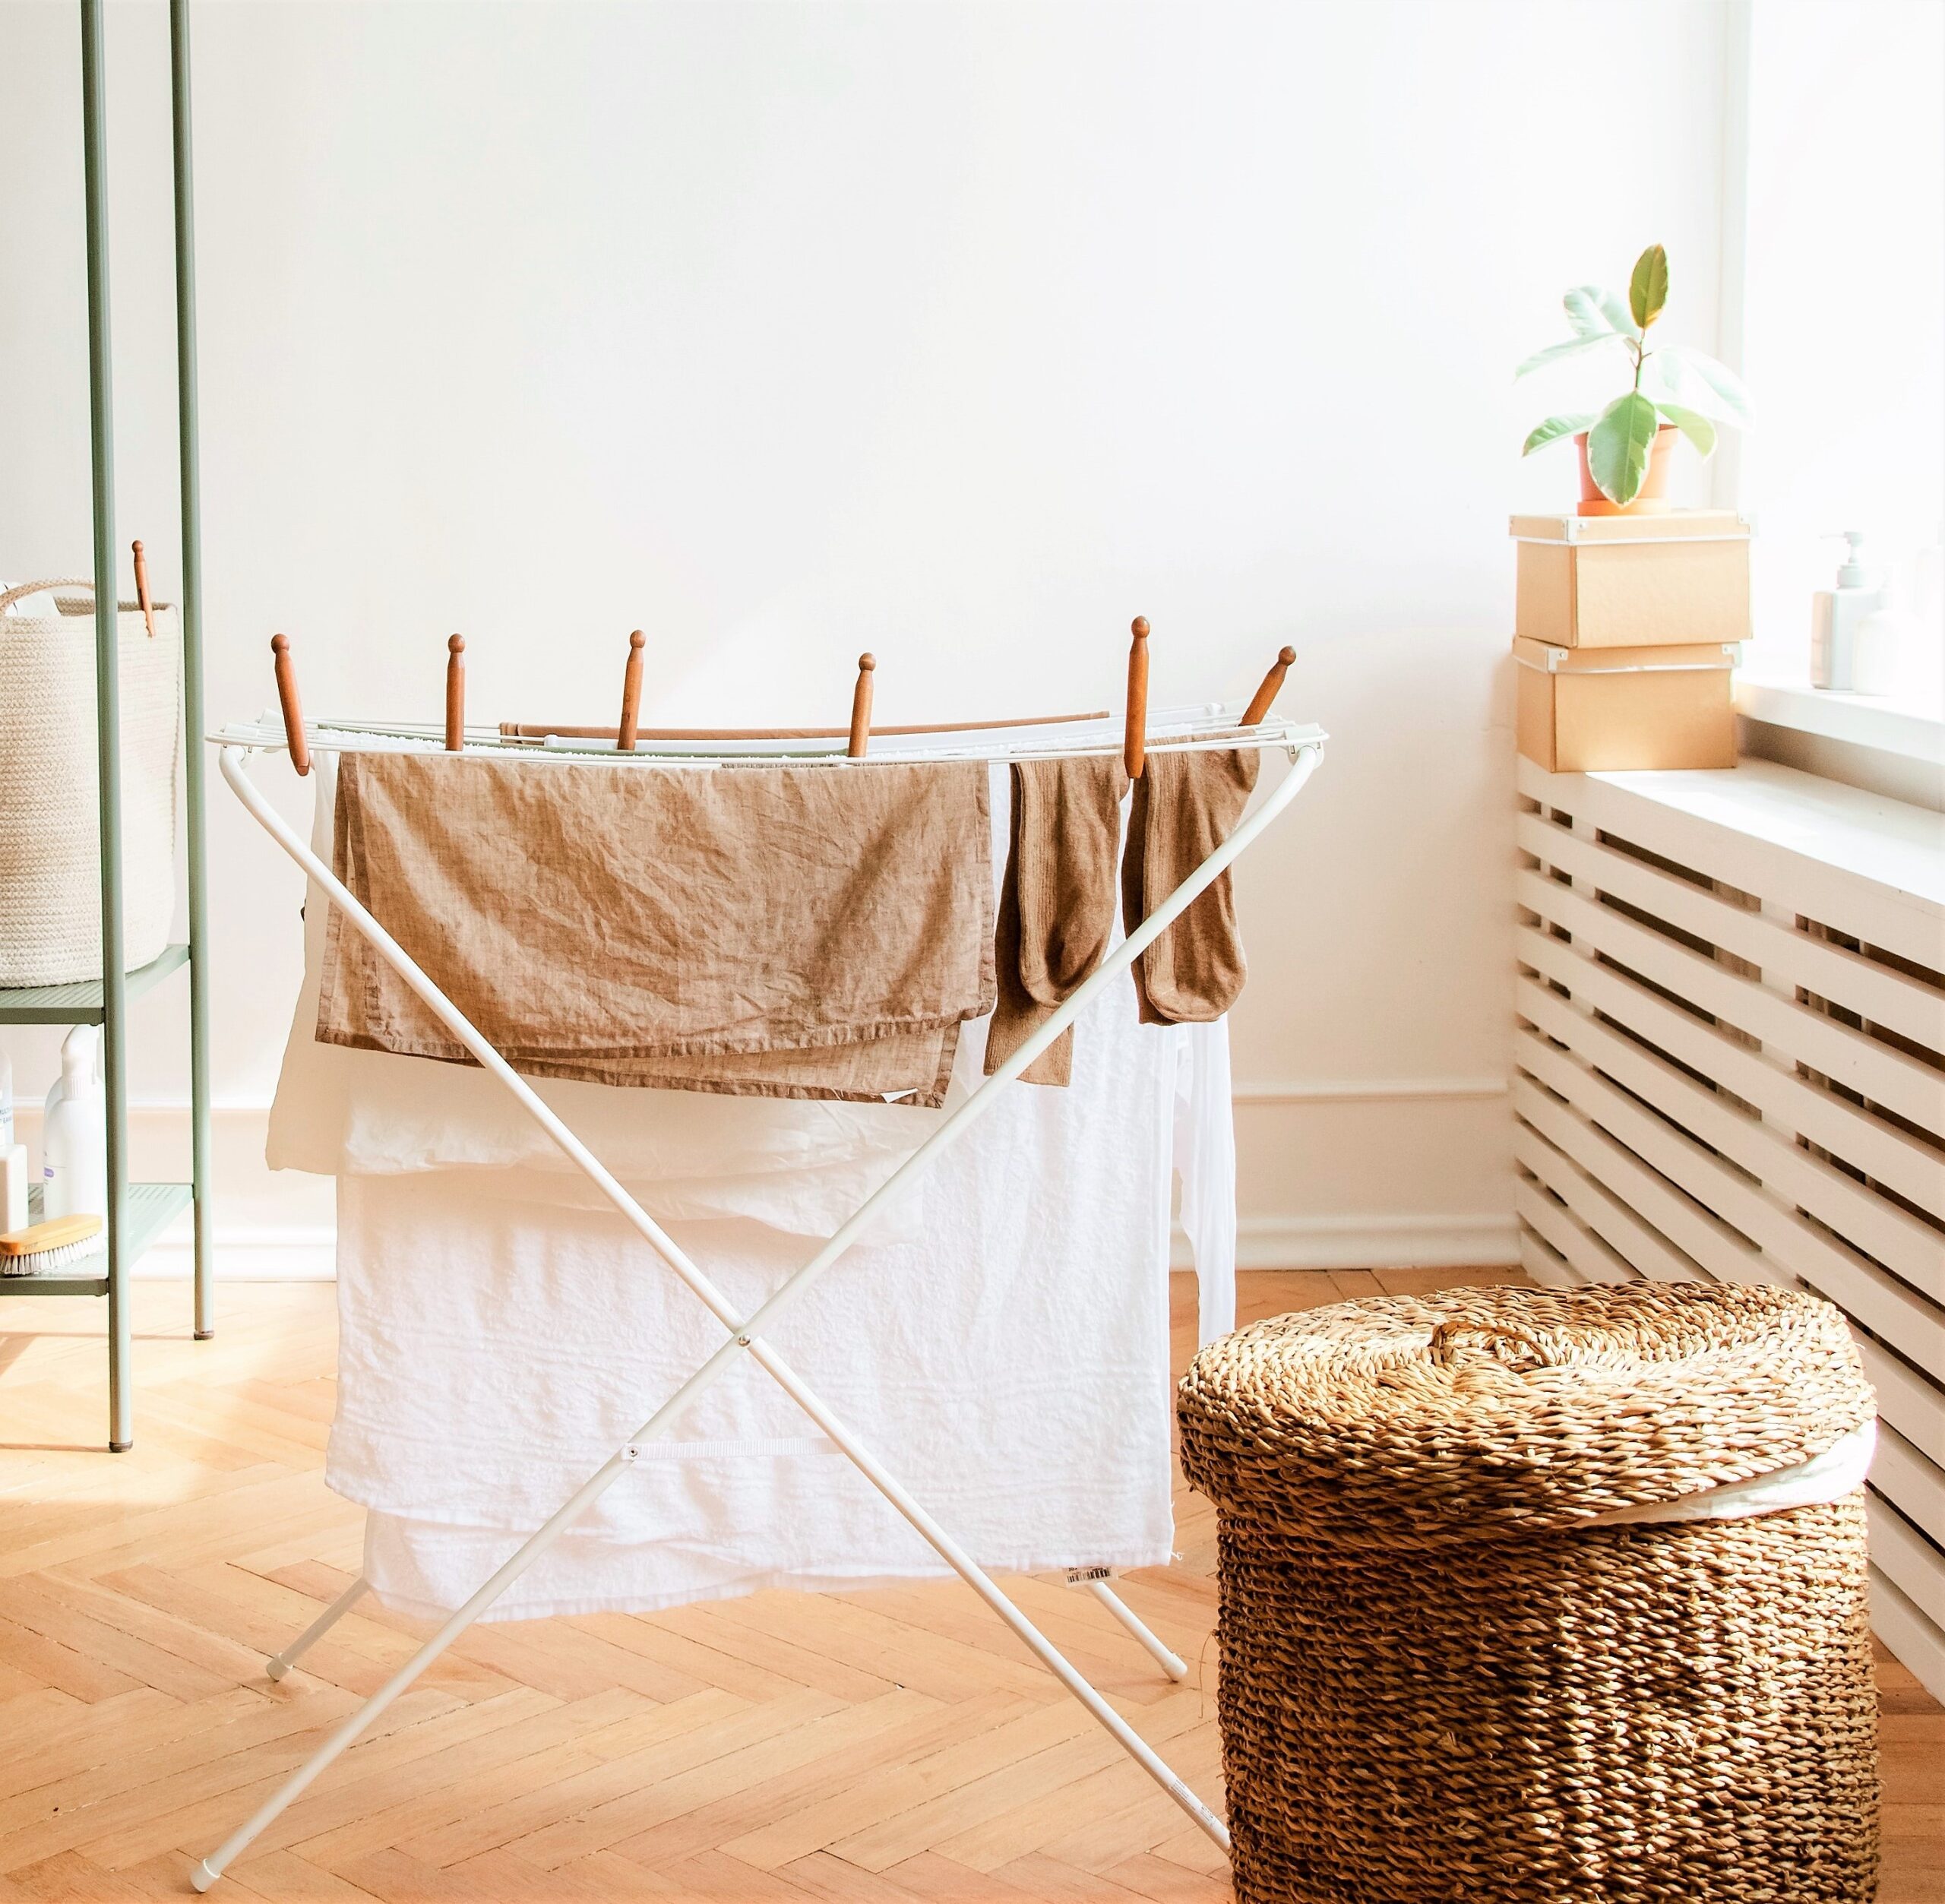 A laundry basket is set on a light wooden floor with a rack of drying clothes in the background.